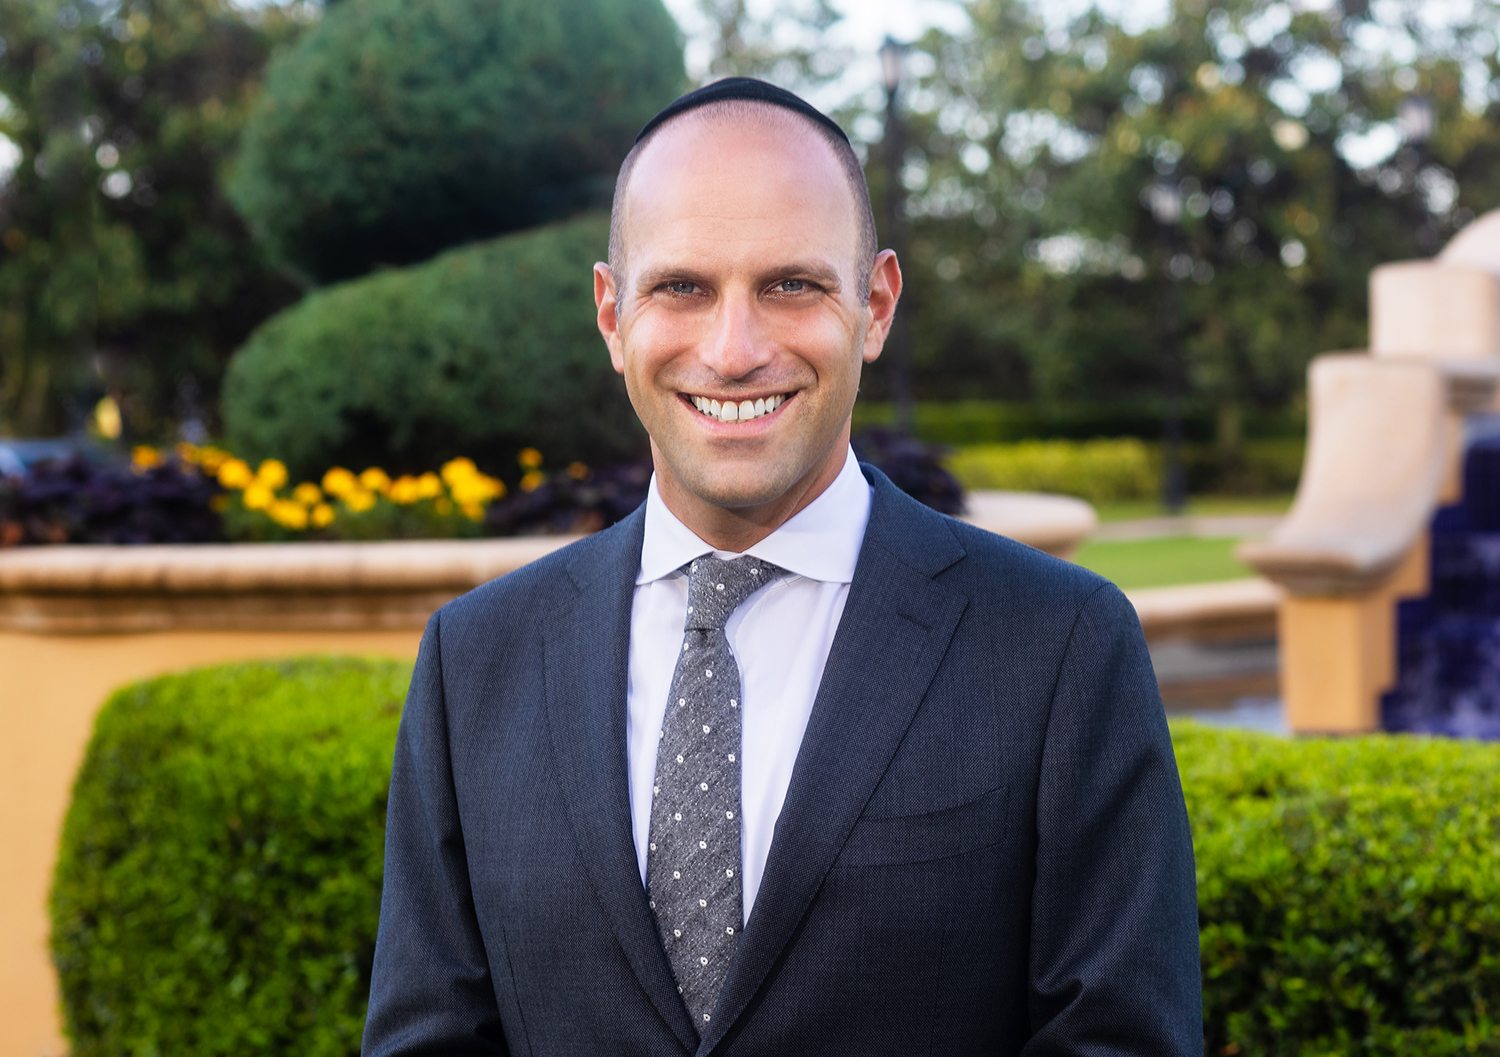 Prioritizing Chesed: OU Board Member and Advocacy Center Chairman Yitzie Pretter